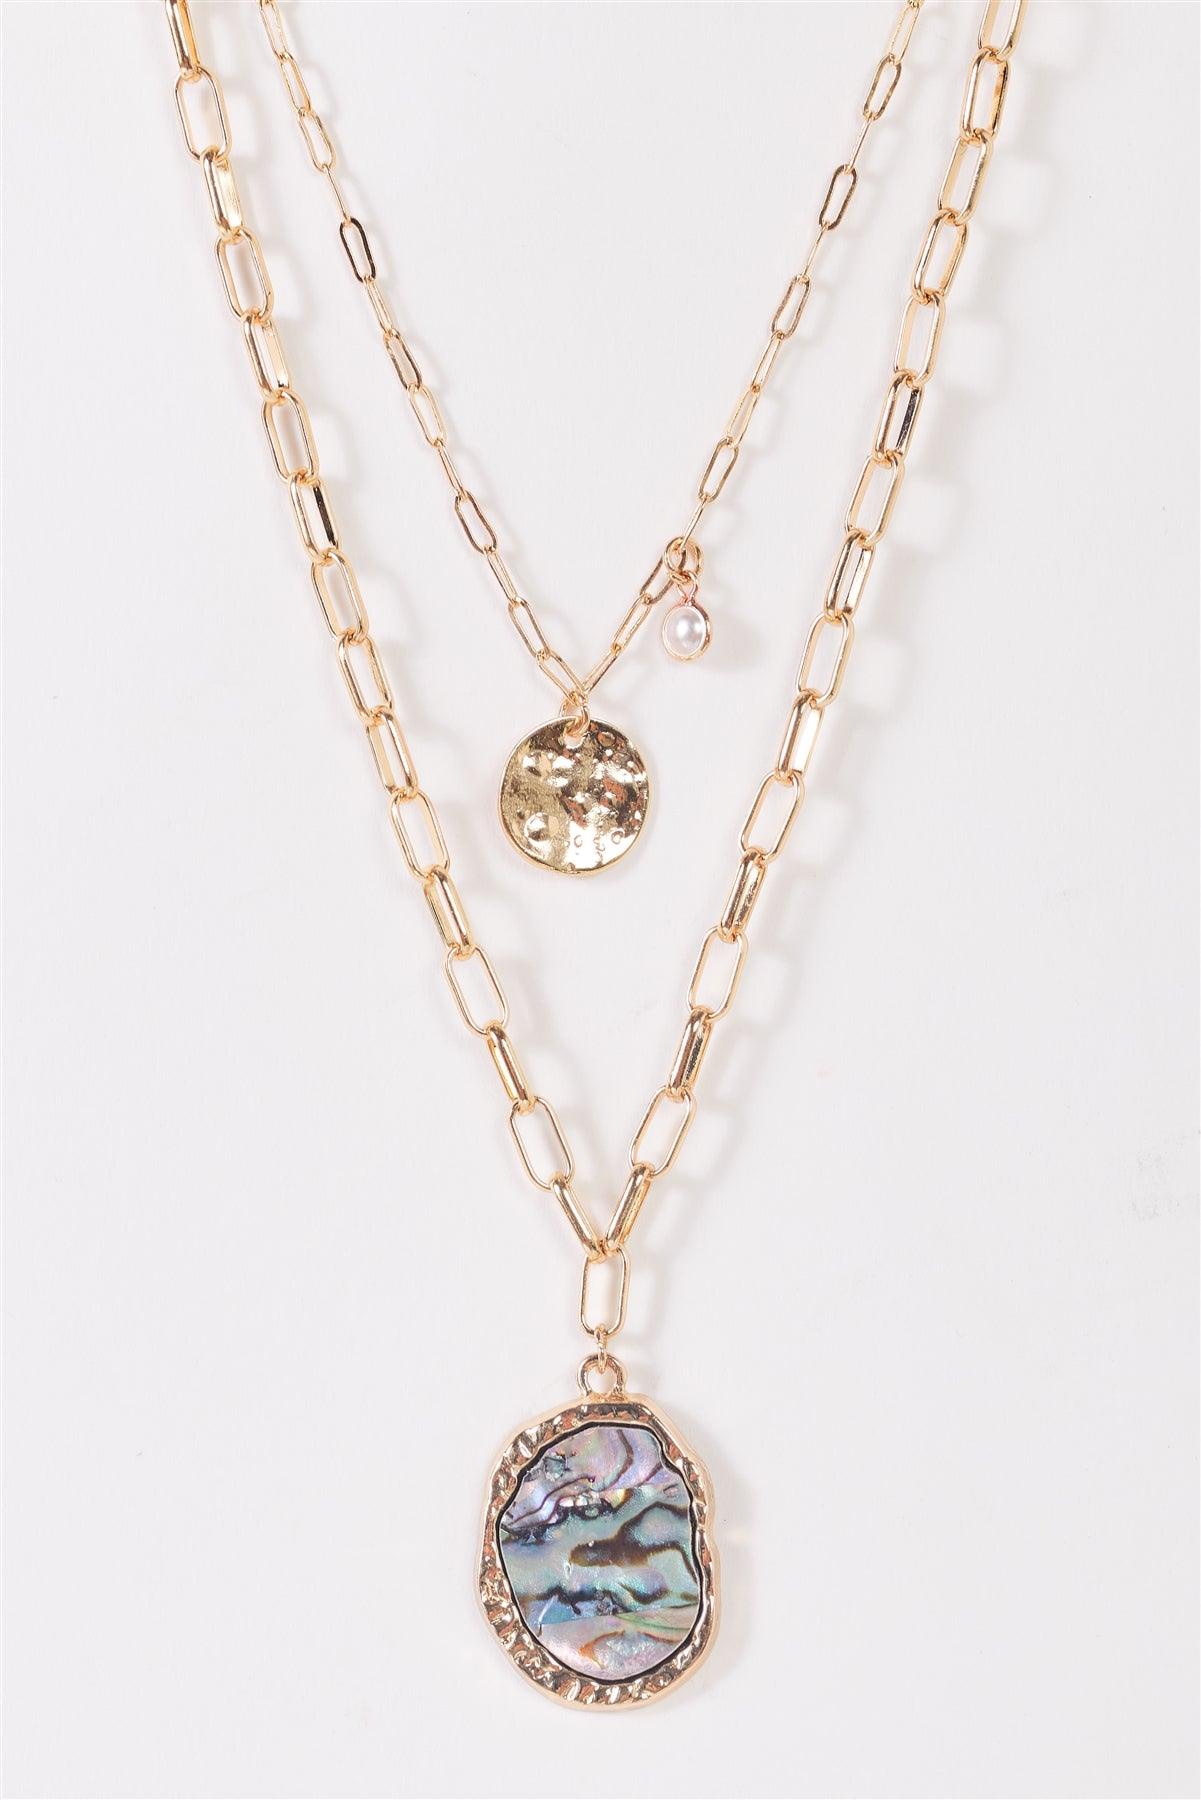 Gold Paper Clip Double Chain With Abalone Asymmetrical Circle & Tiny Pearl Pendants Necklace /3 Pieces